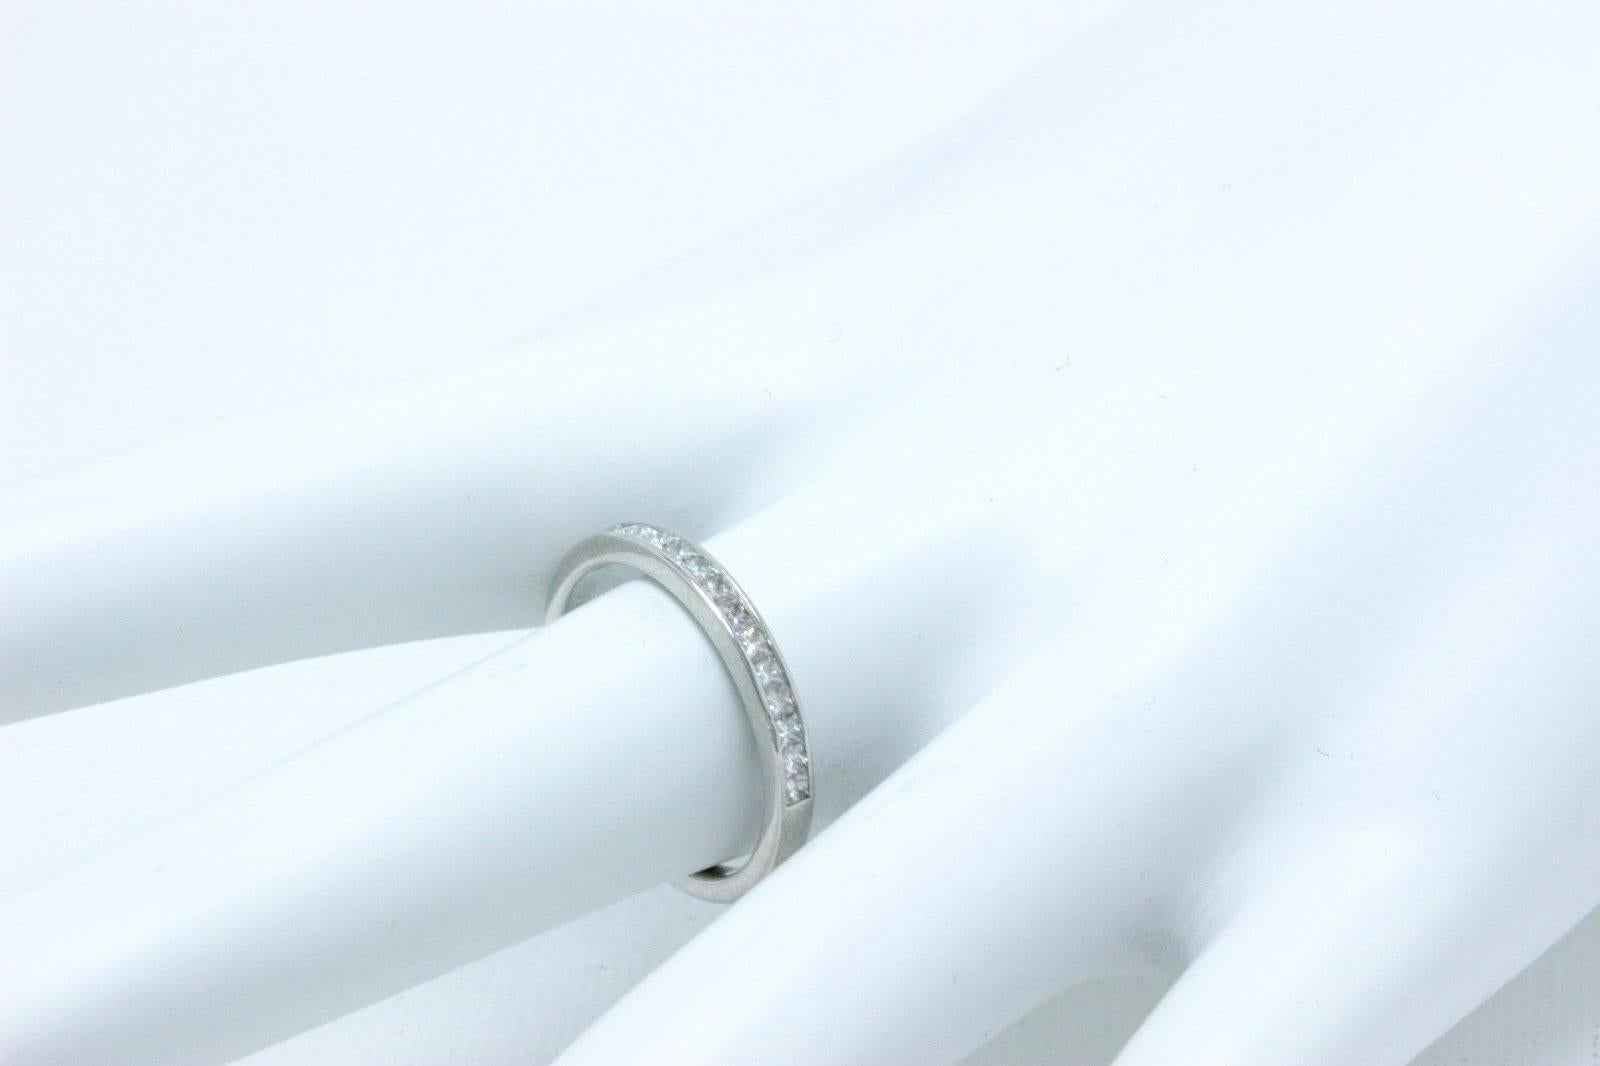 Tiffany & Co. Square Cut Diamond Wedding Band Ring in Platinum 0.39 tcw 2.6 MM In Excellent Condition For Sale In San Diego, CA